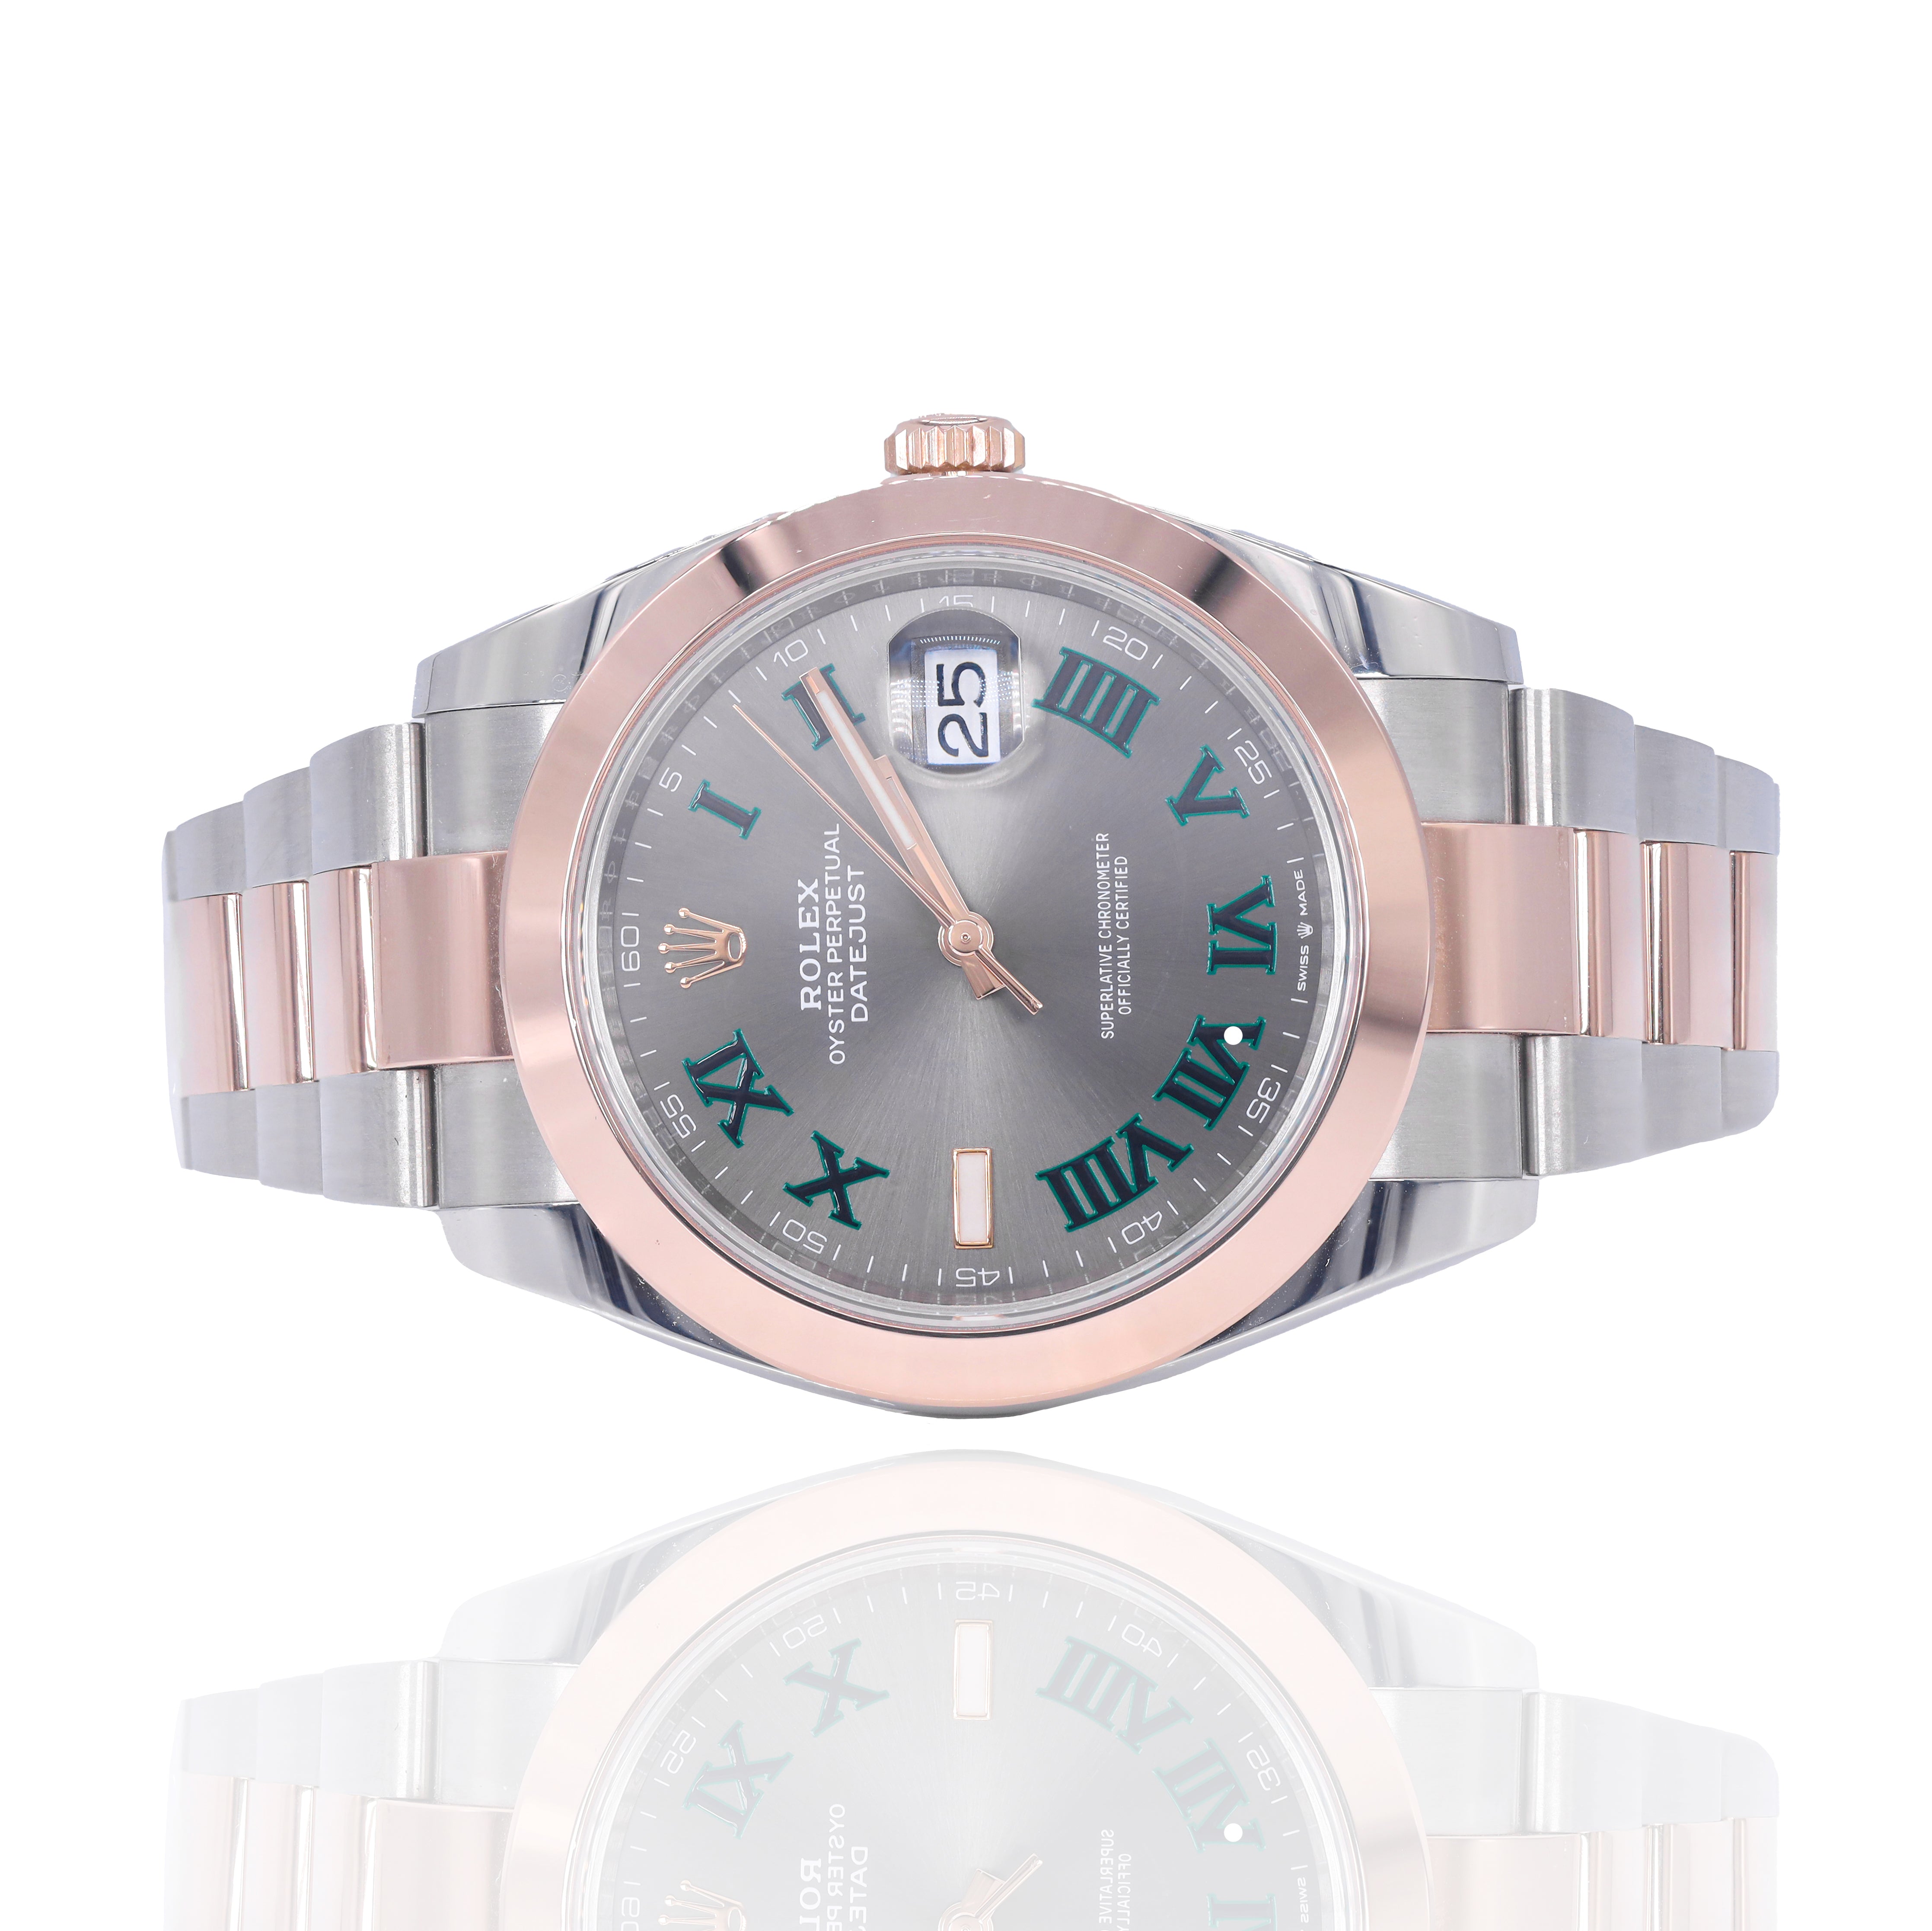 Rolex 126301 Datejust 41mm Two-Tone Rose Gold Wimbledon Dial